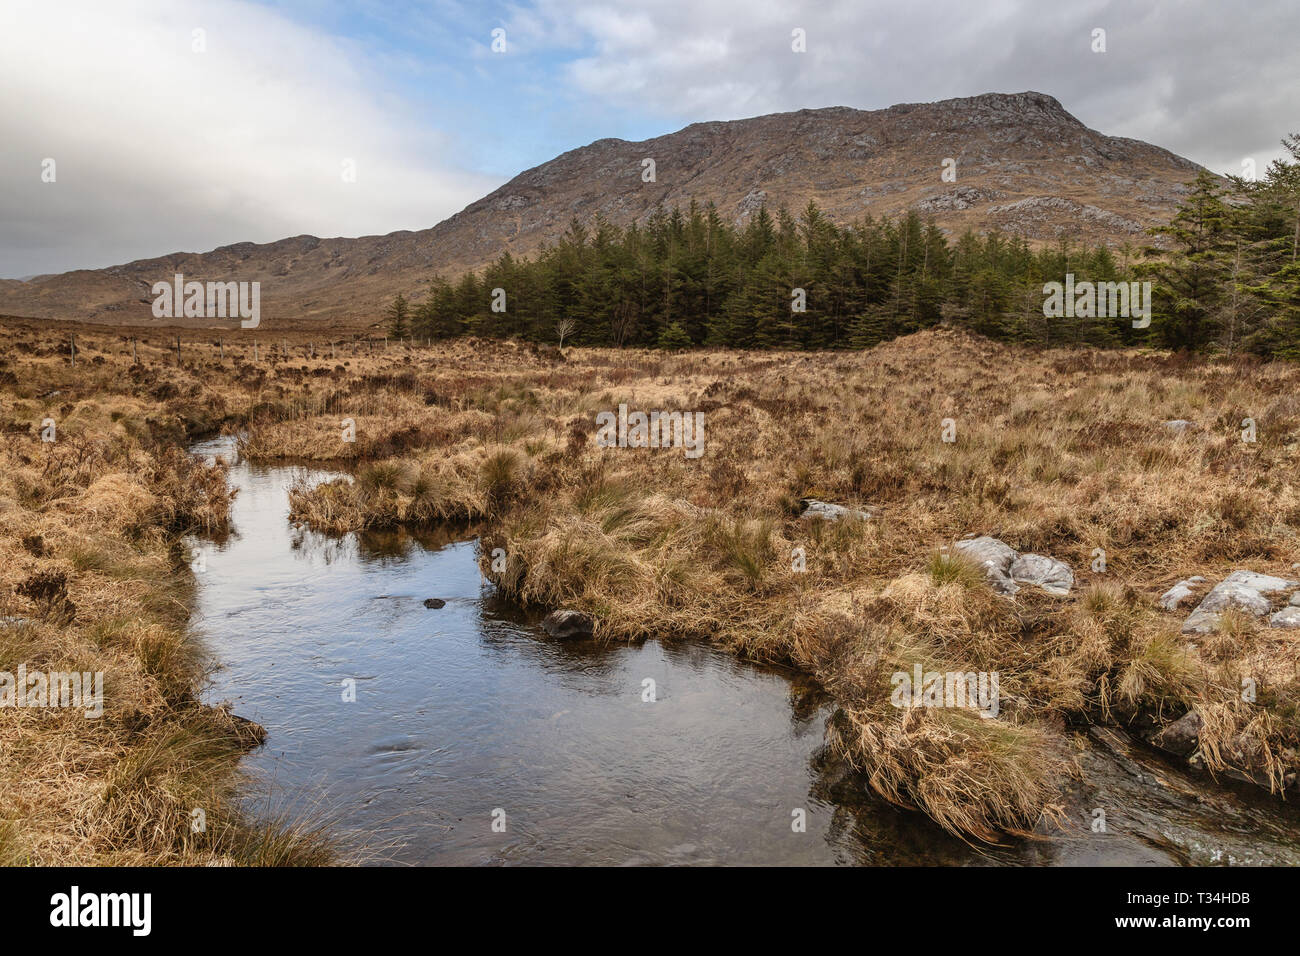 Conemara lake and forest with mountains in background, Maam Cross, Galway, Ireland Stock Photo